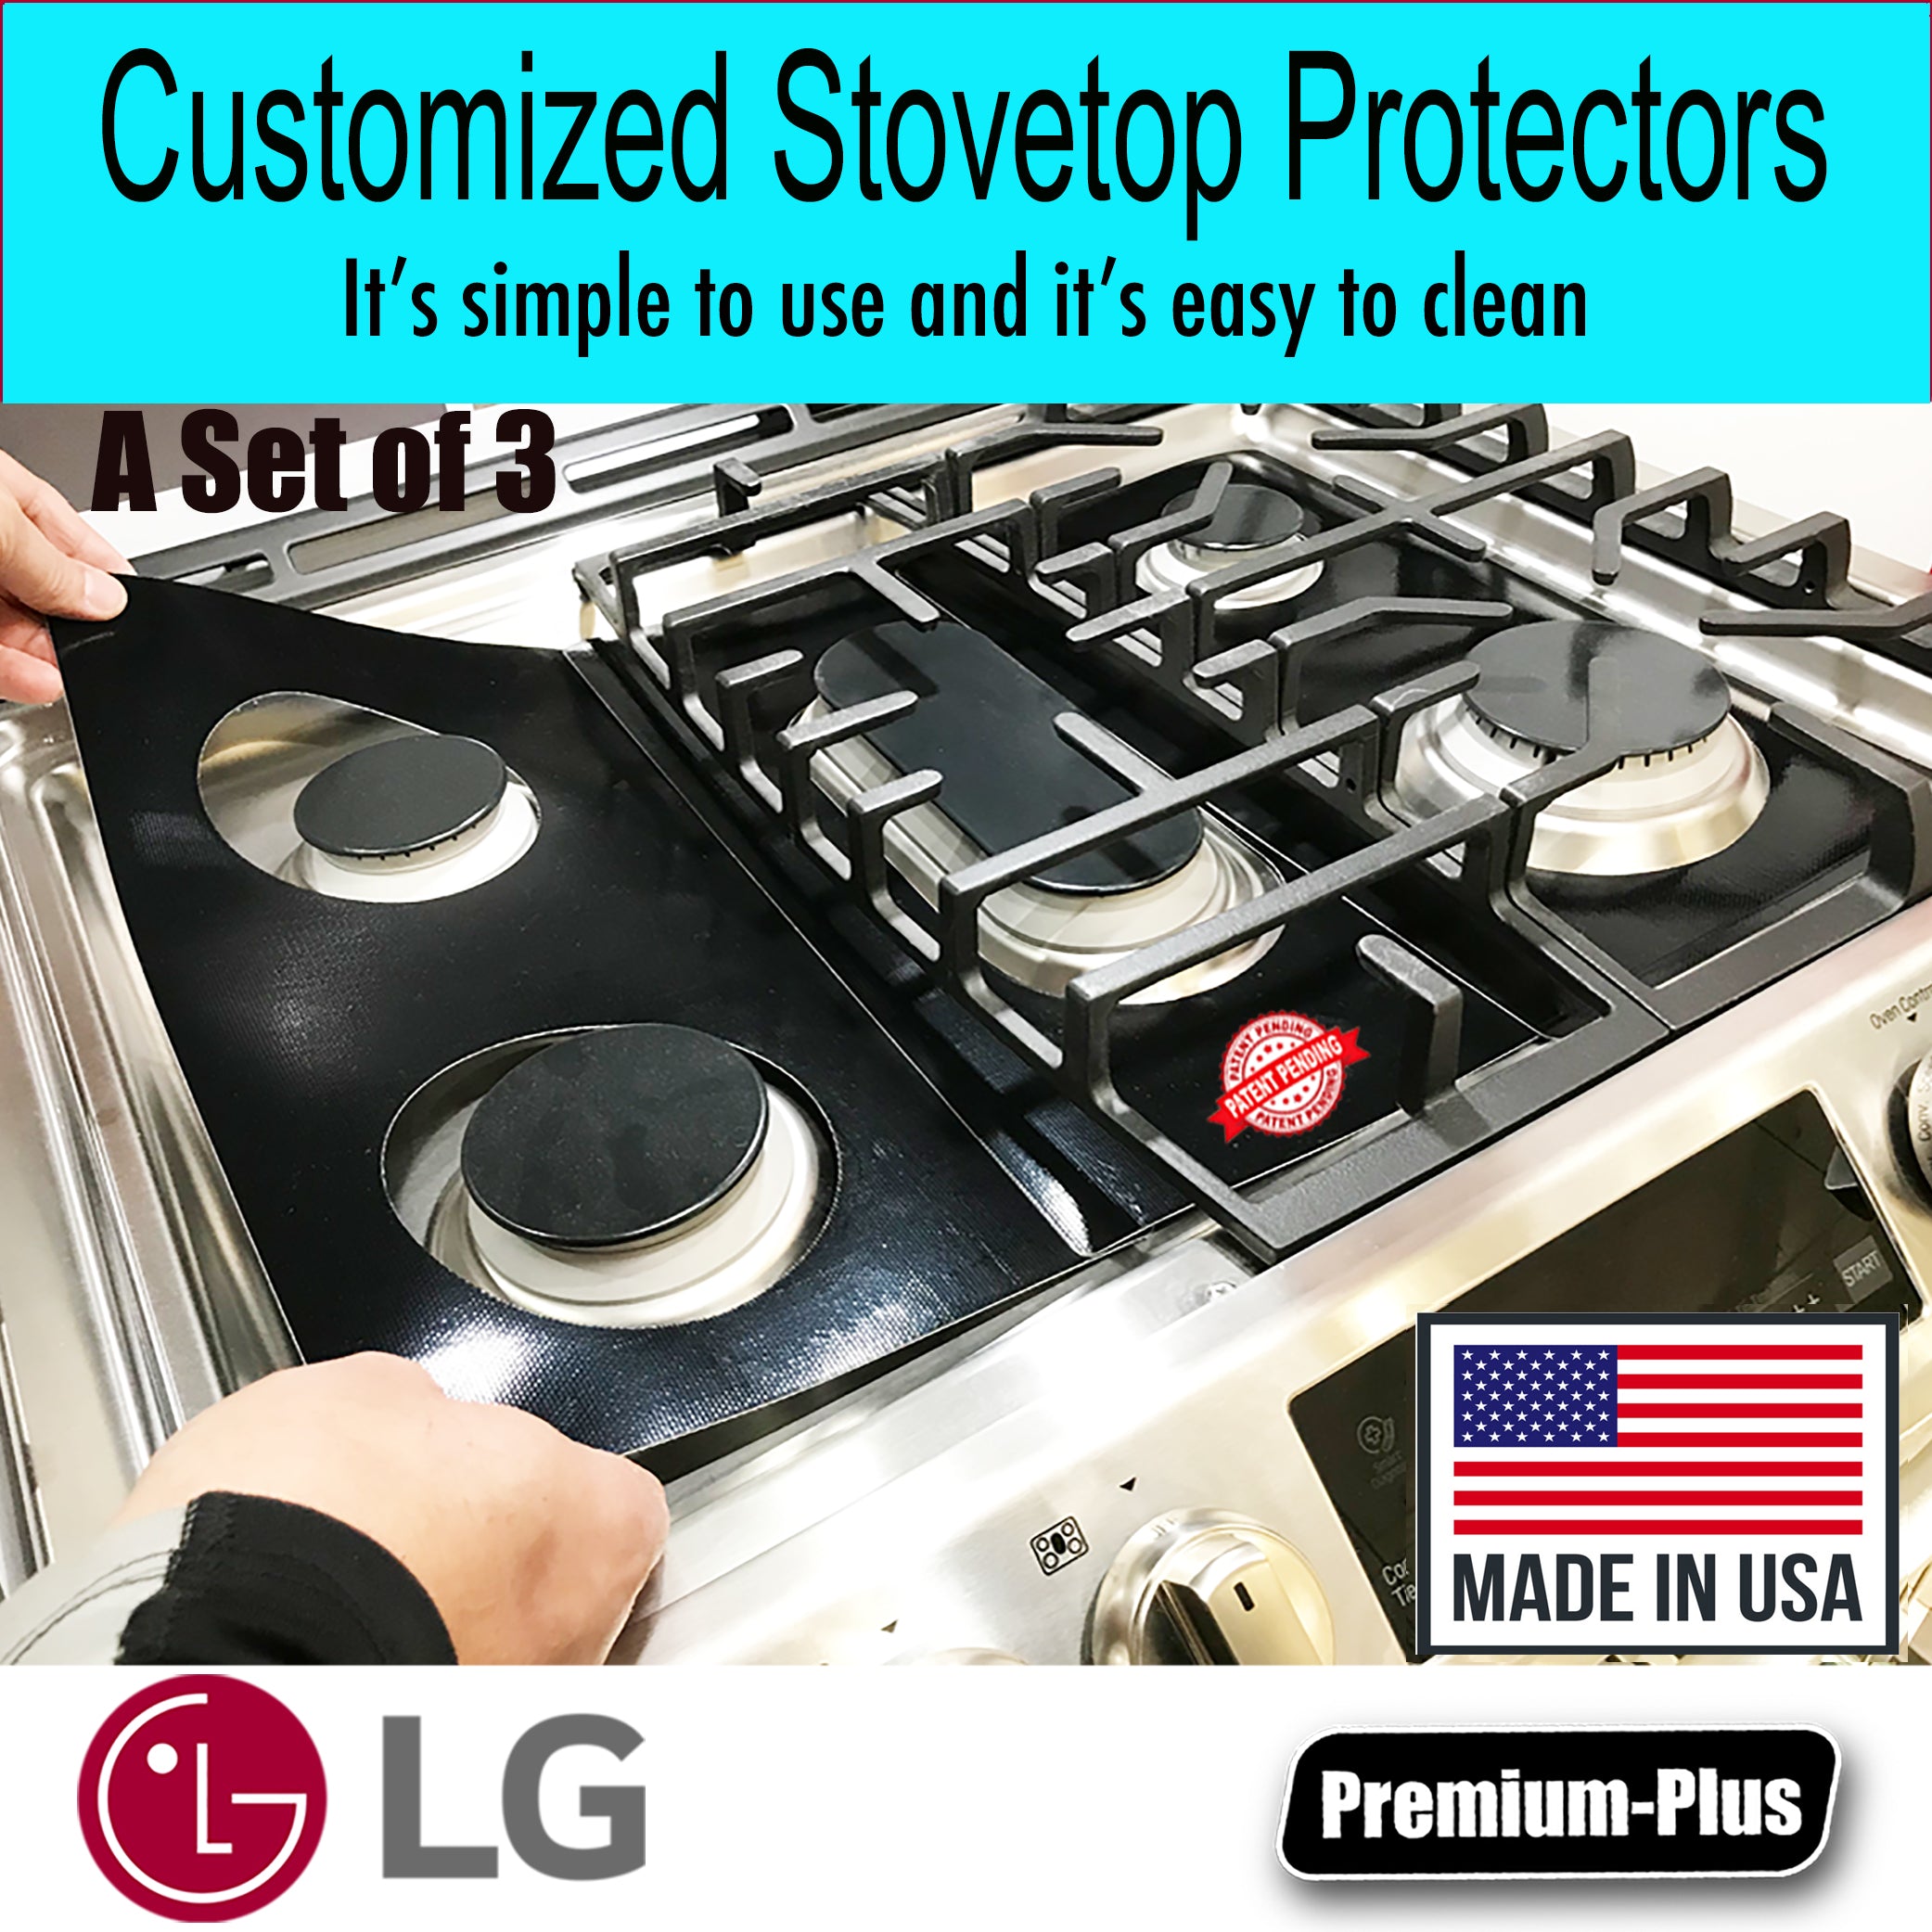 Stove Protective Mat, Stove Cover, Stove Guard Stove Top Protector